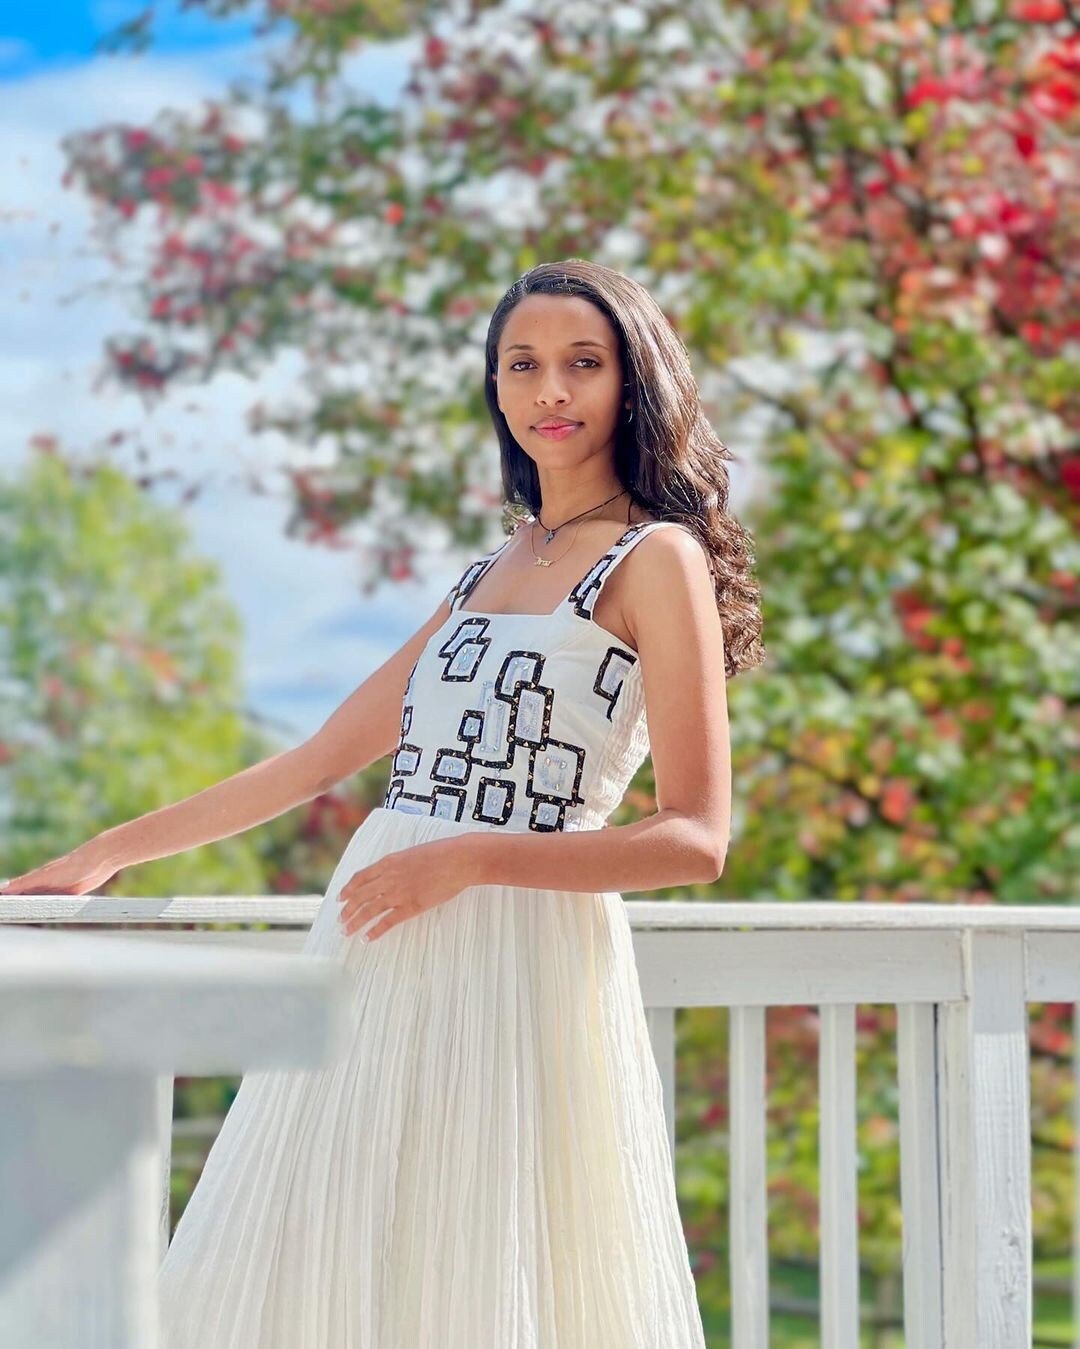 Timeless Simplicity in Habesha Dress Ethiopian Dress with Square Box-Like Patterns